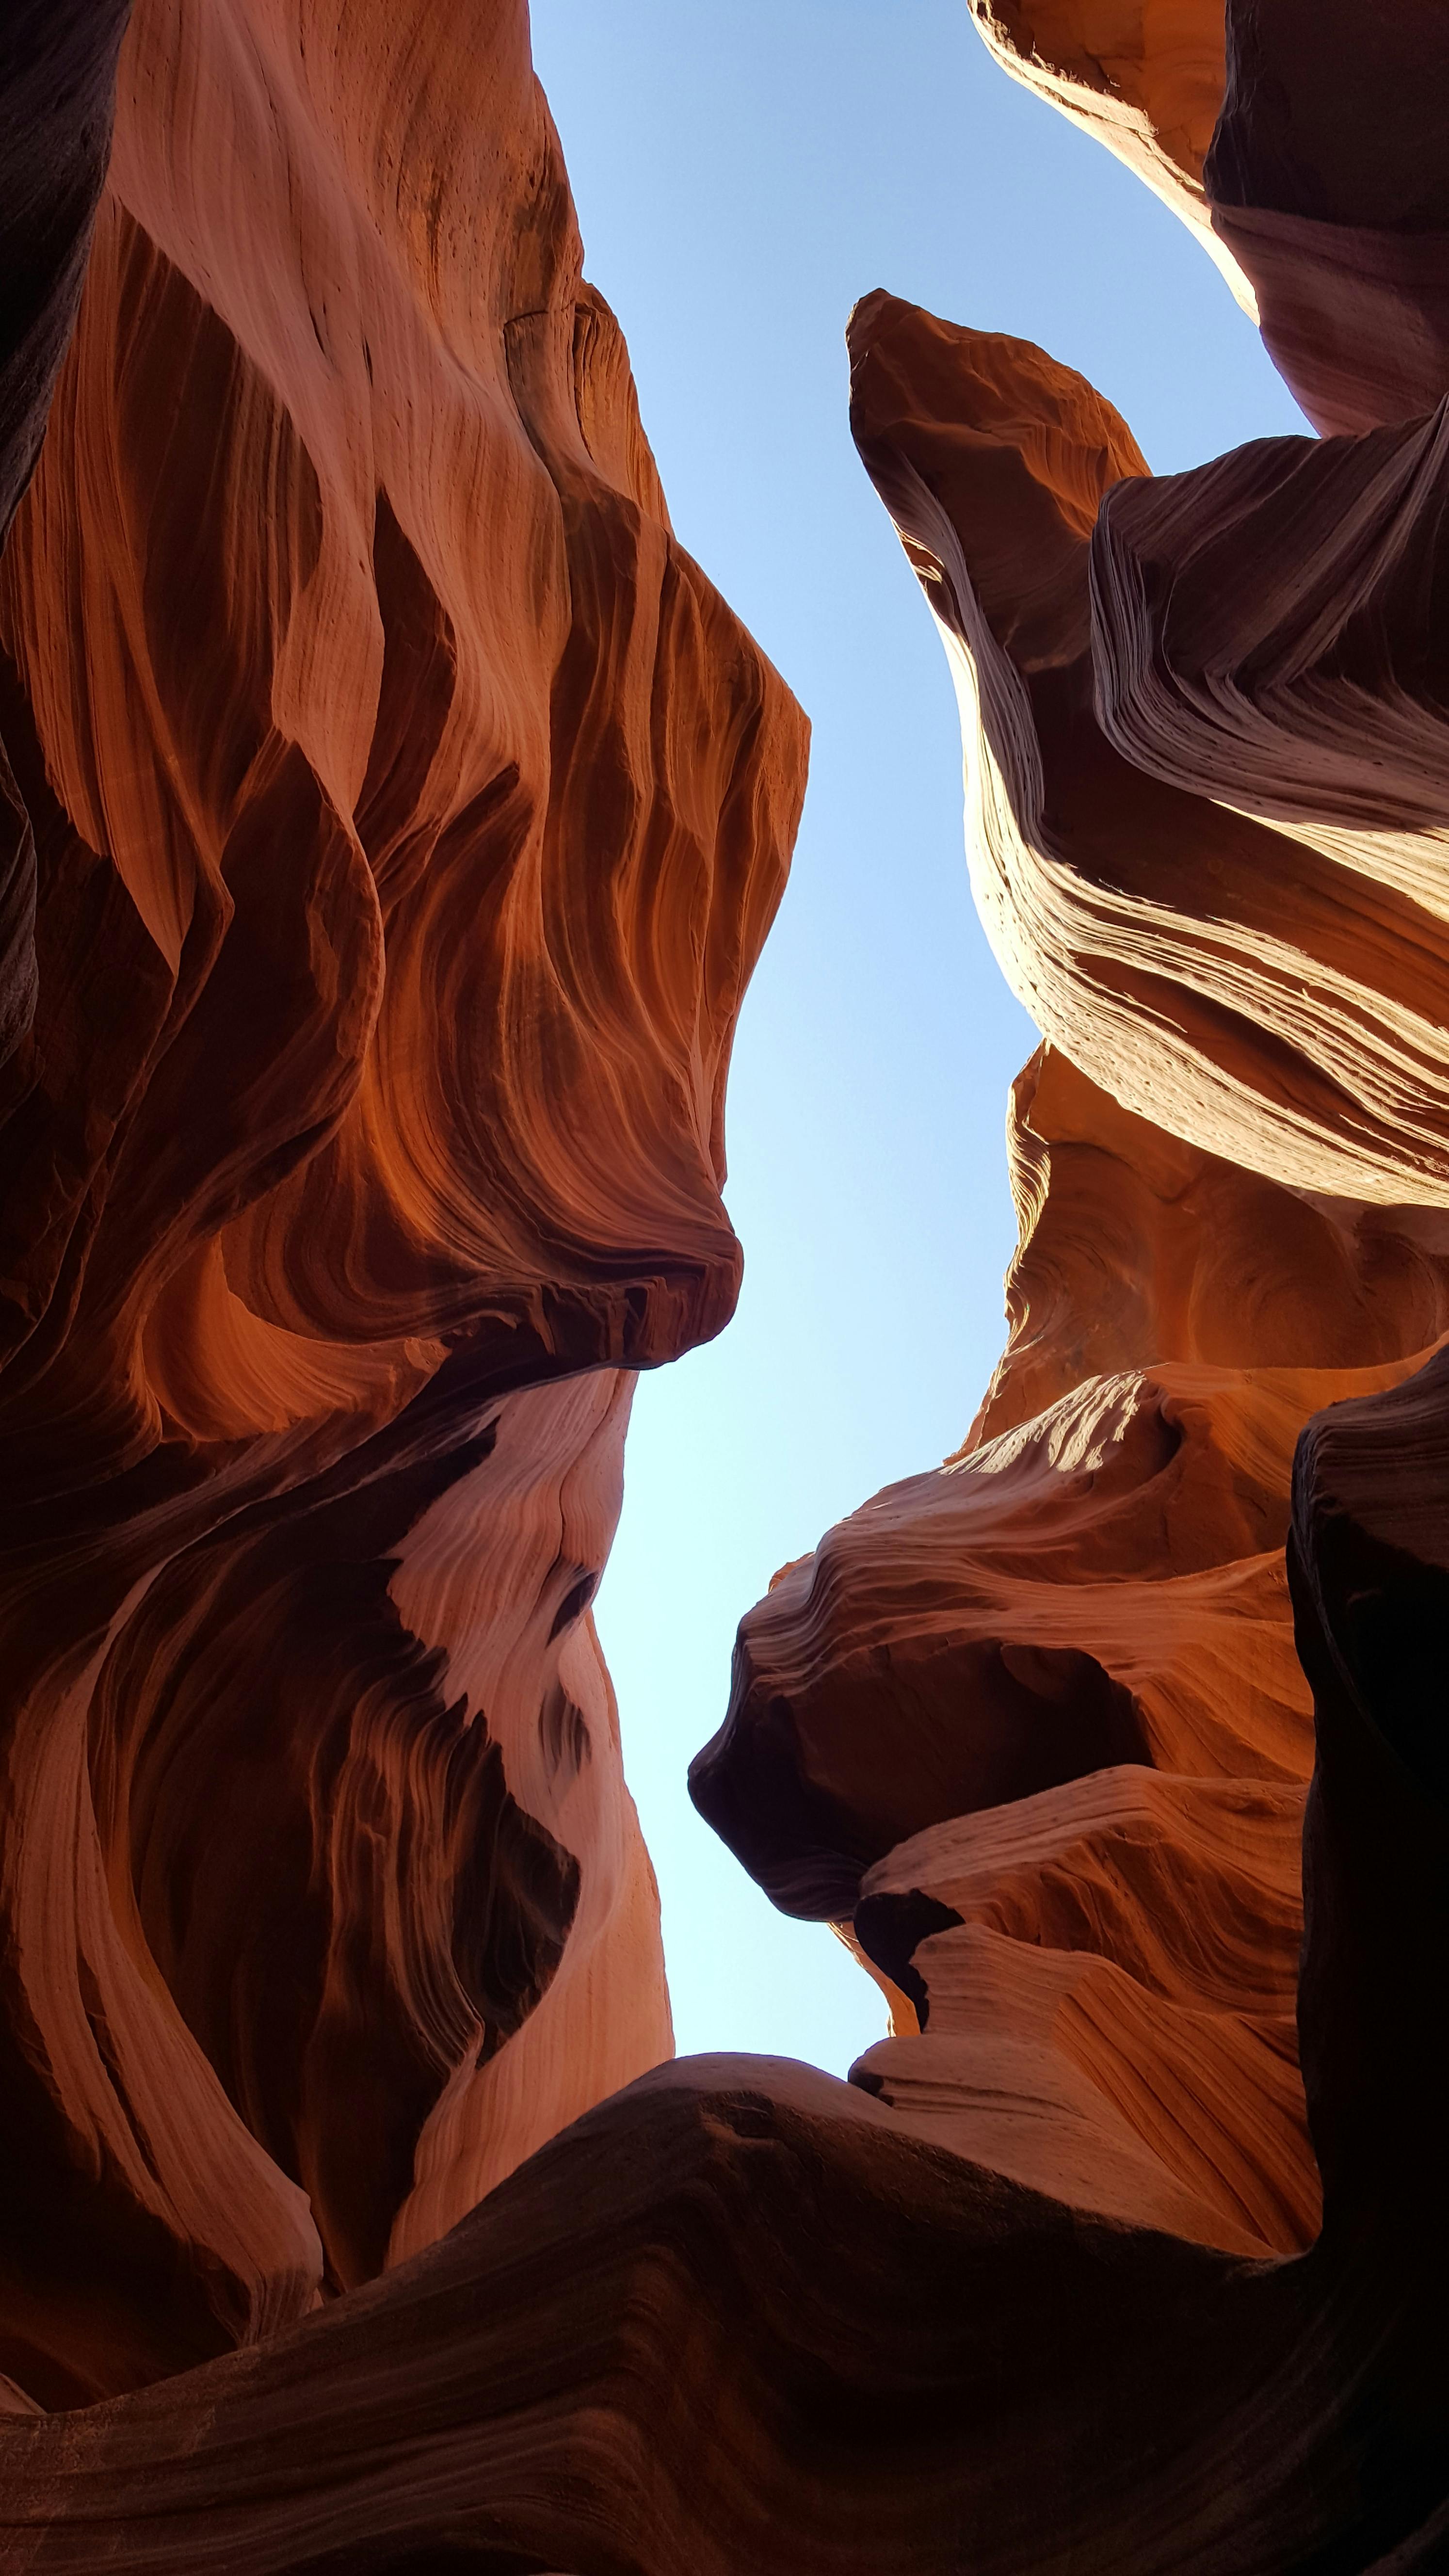 a picturesque view of the stone walls and sky from inside the antelope canyon